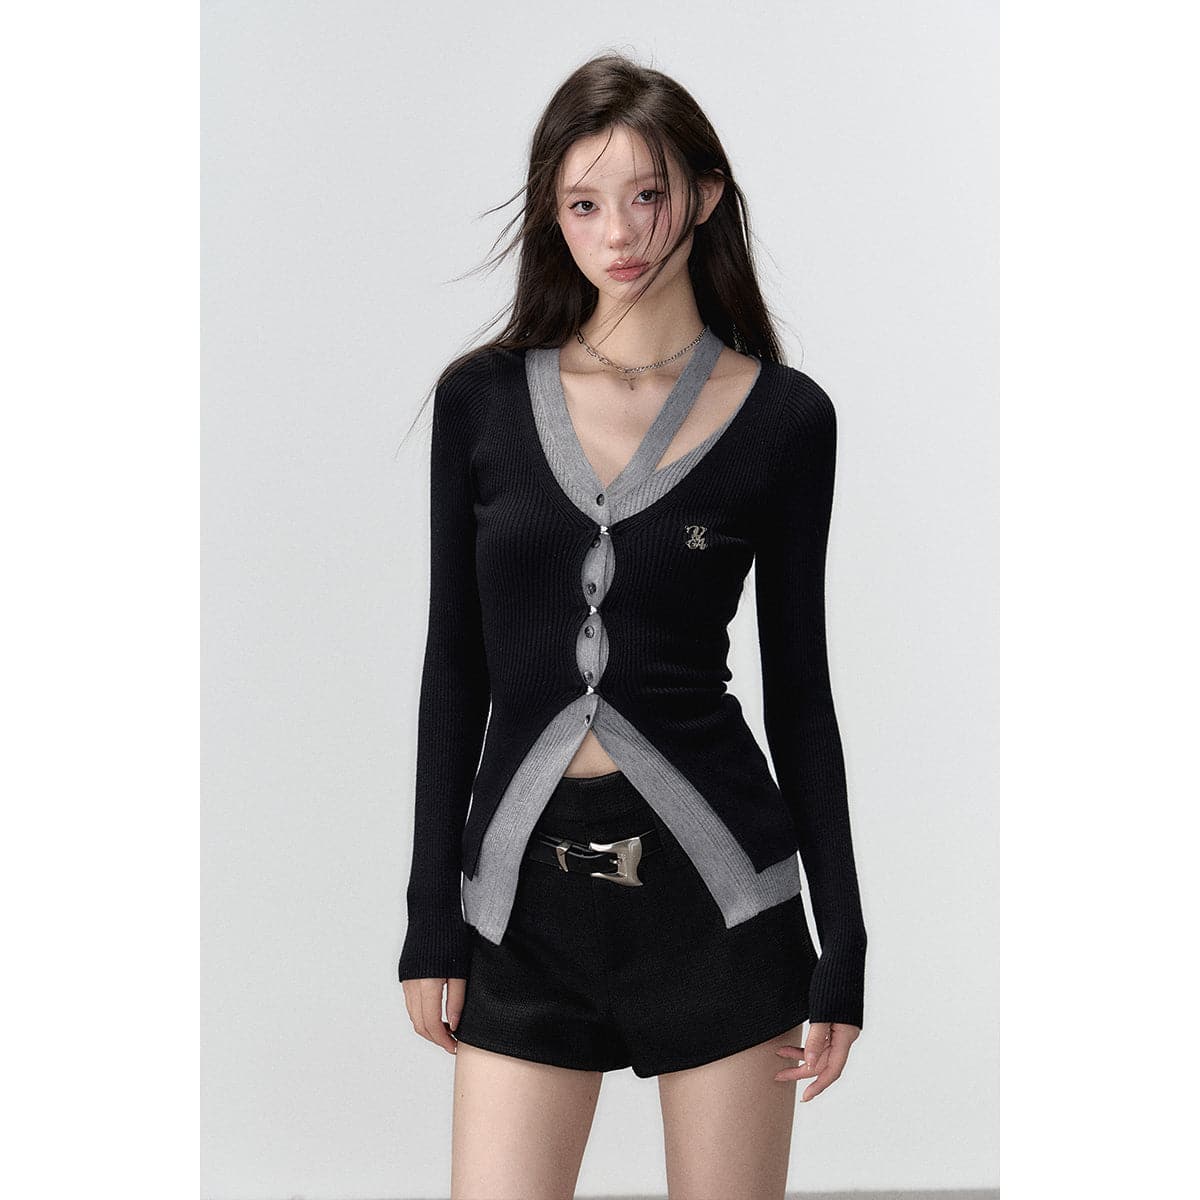 Elegant Black Knit Long Cardigan With Hollow Out Design - chiclara